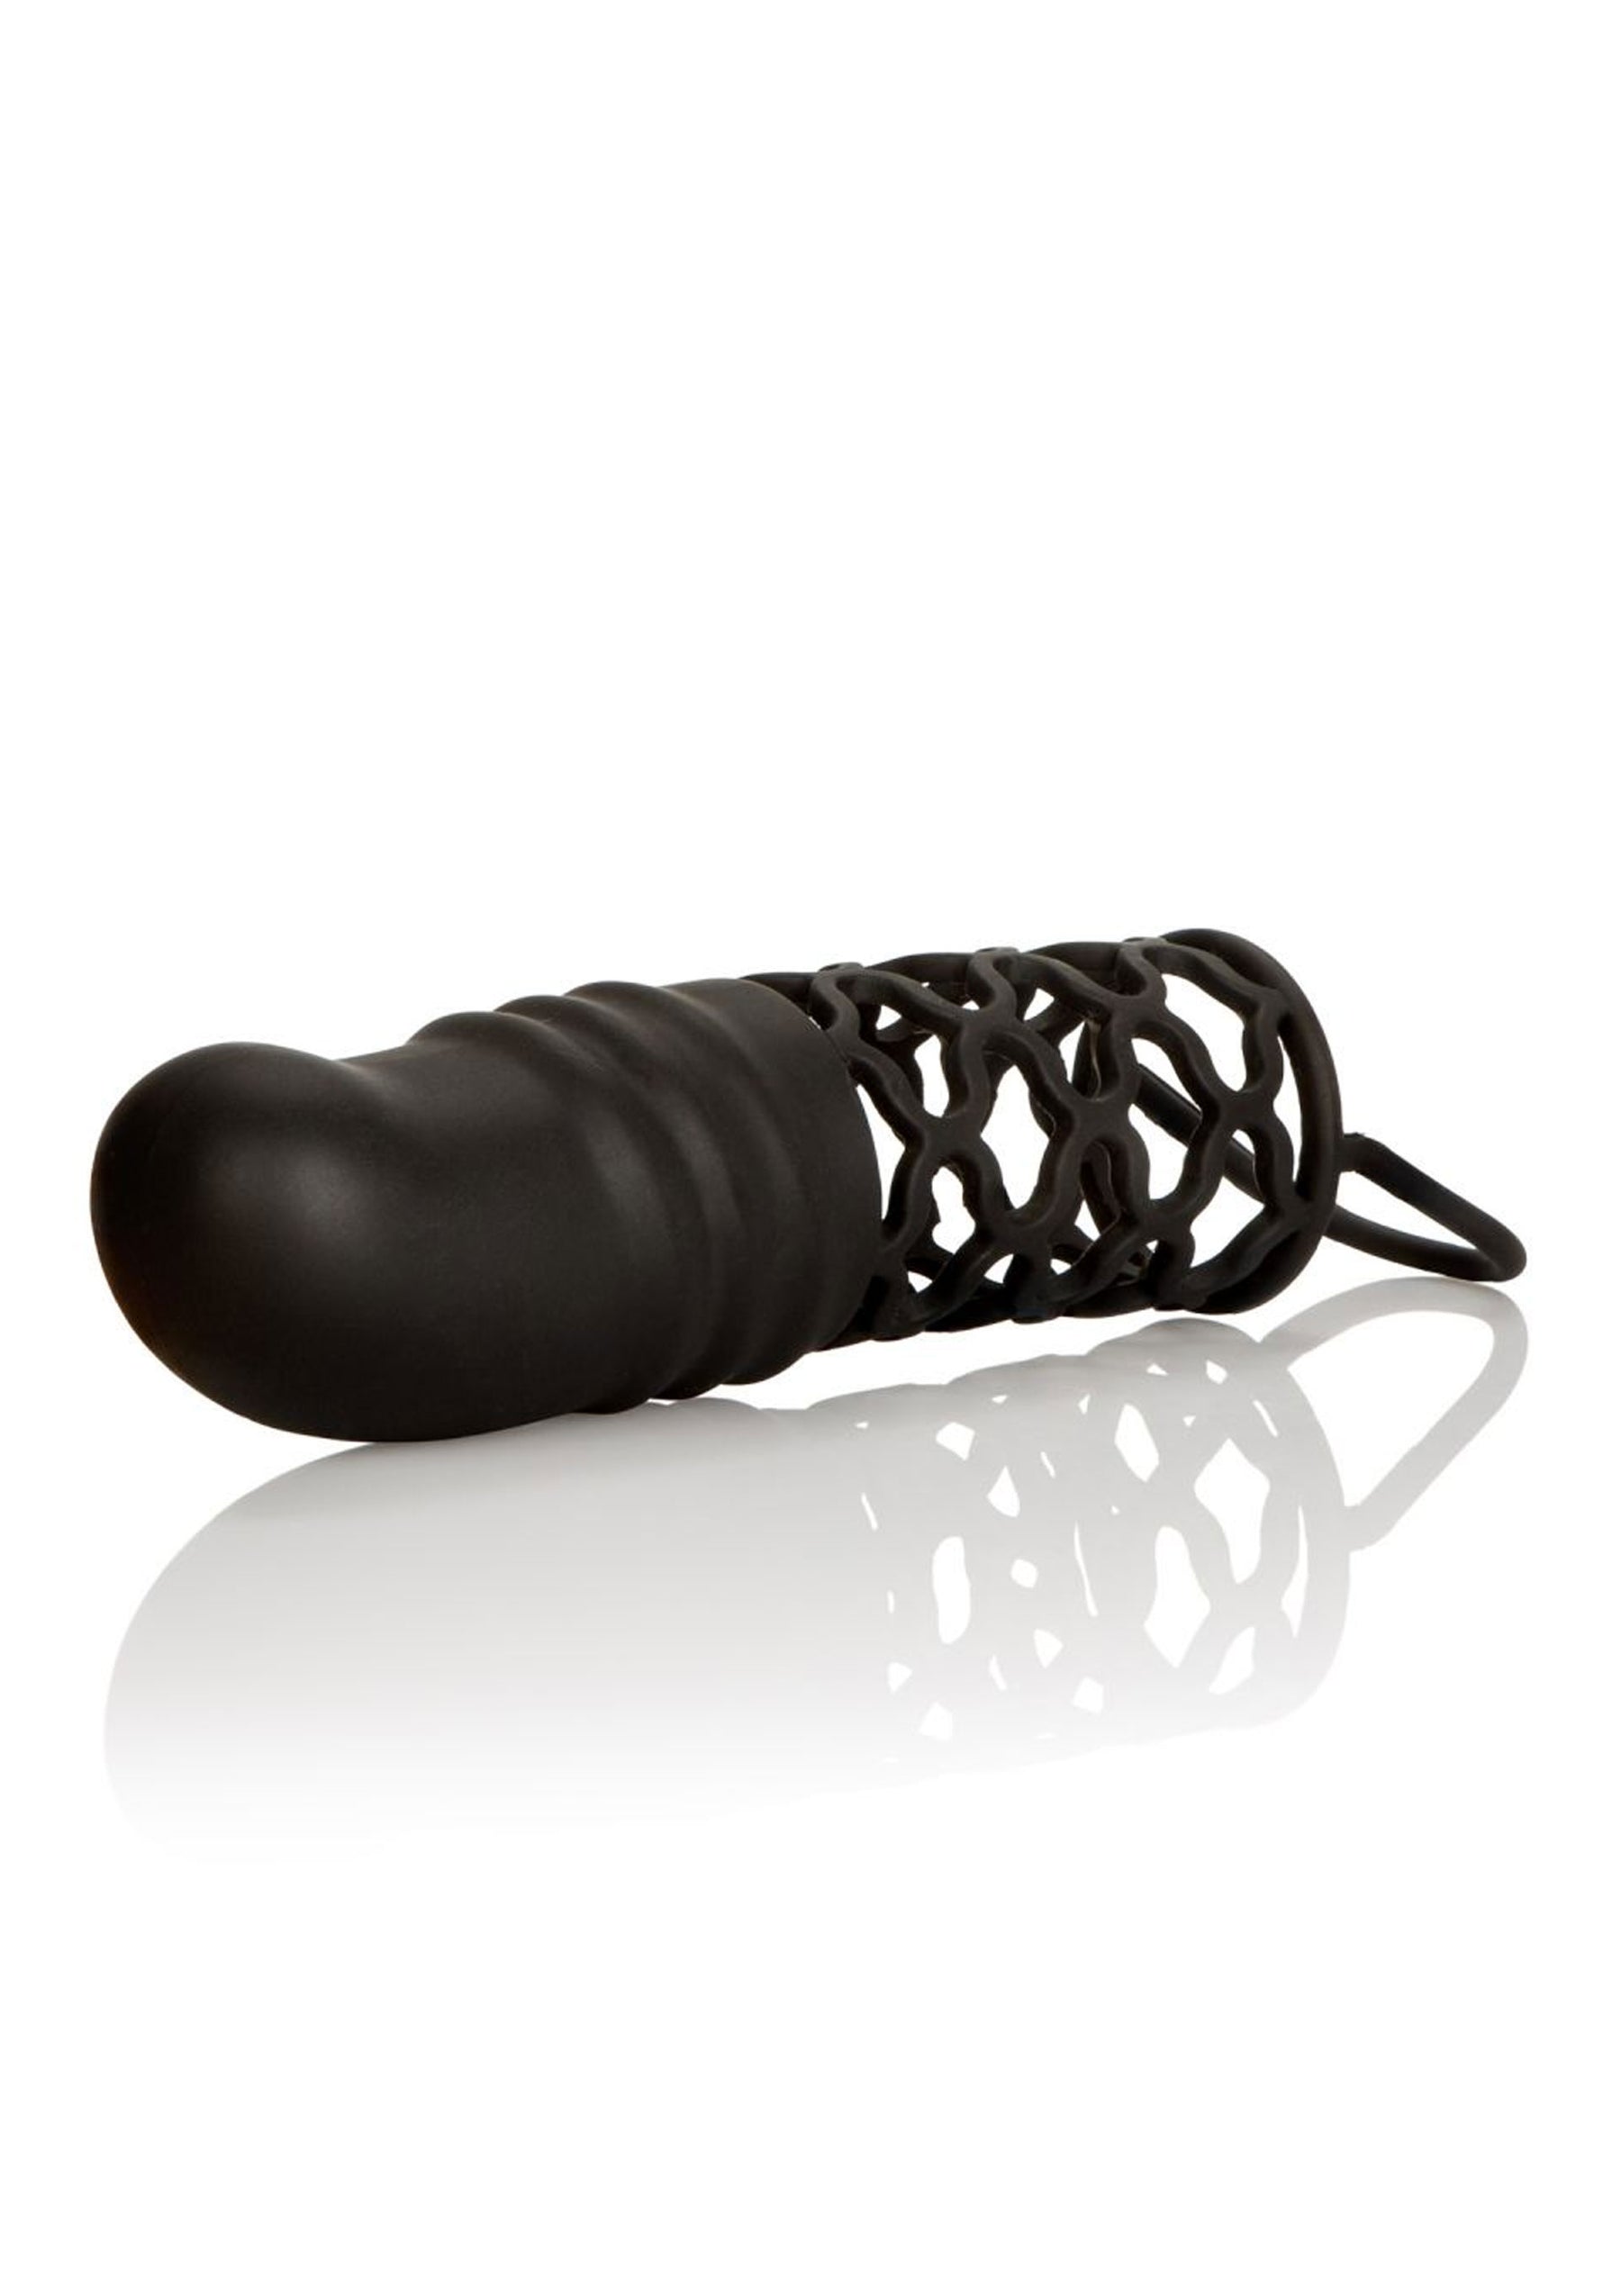 Silicone 2 inch Extension-erotic-world-munchen.myshopify.com